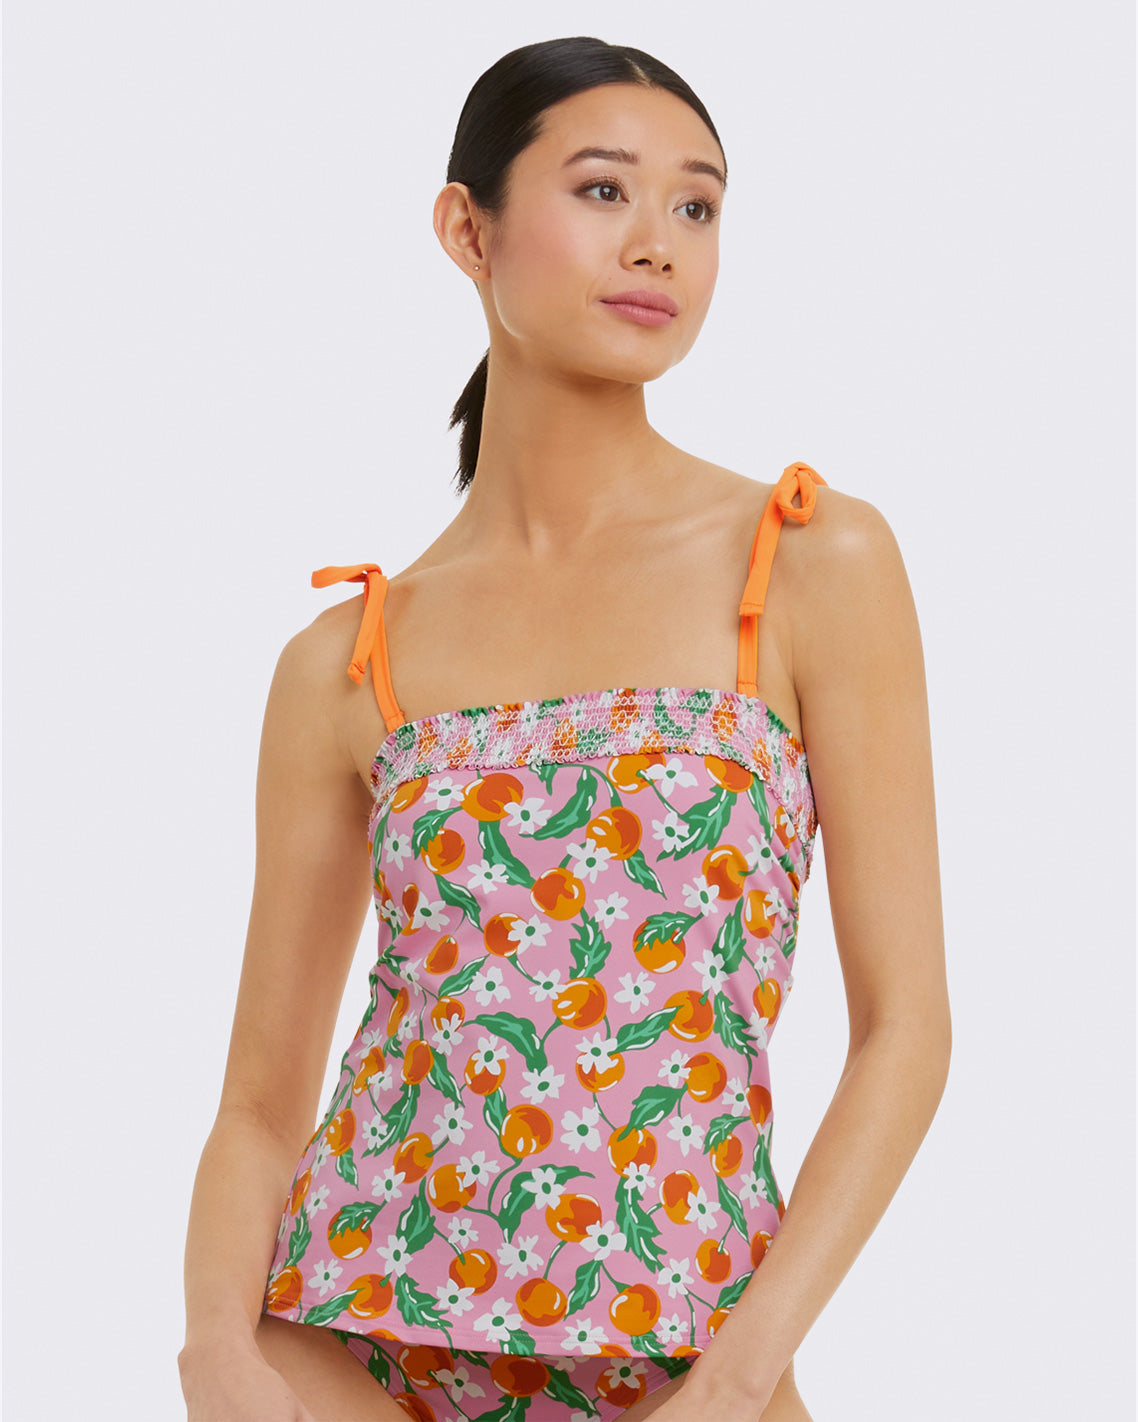 Floral Lands' End Plus Size Tankini Swimwear for Women for sale